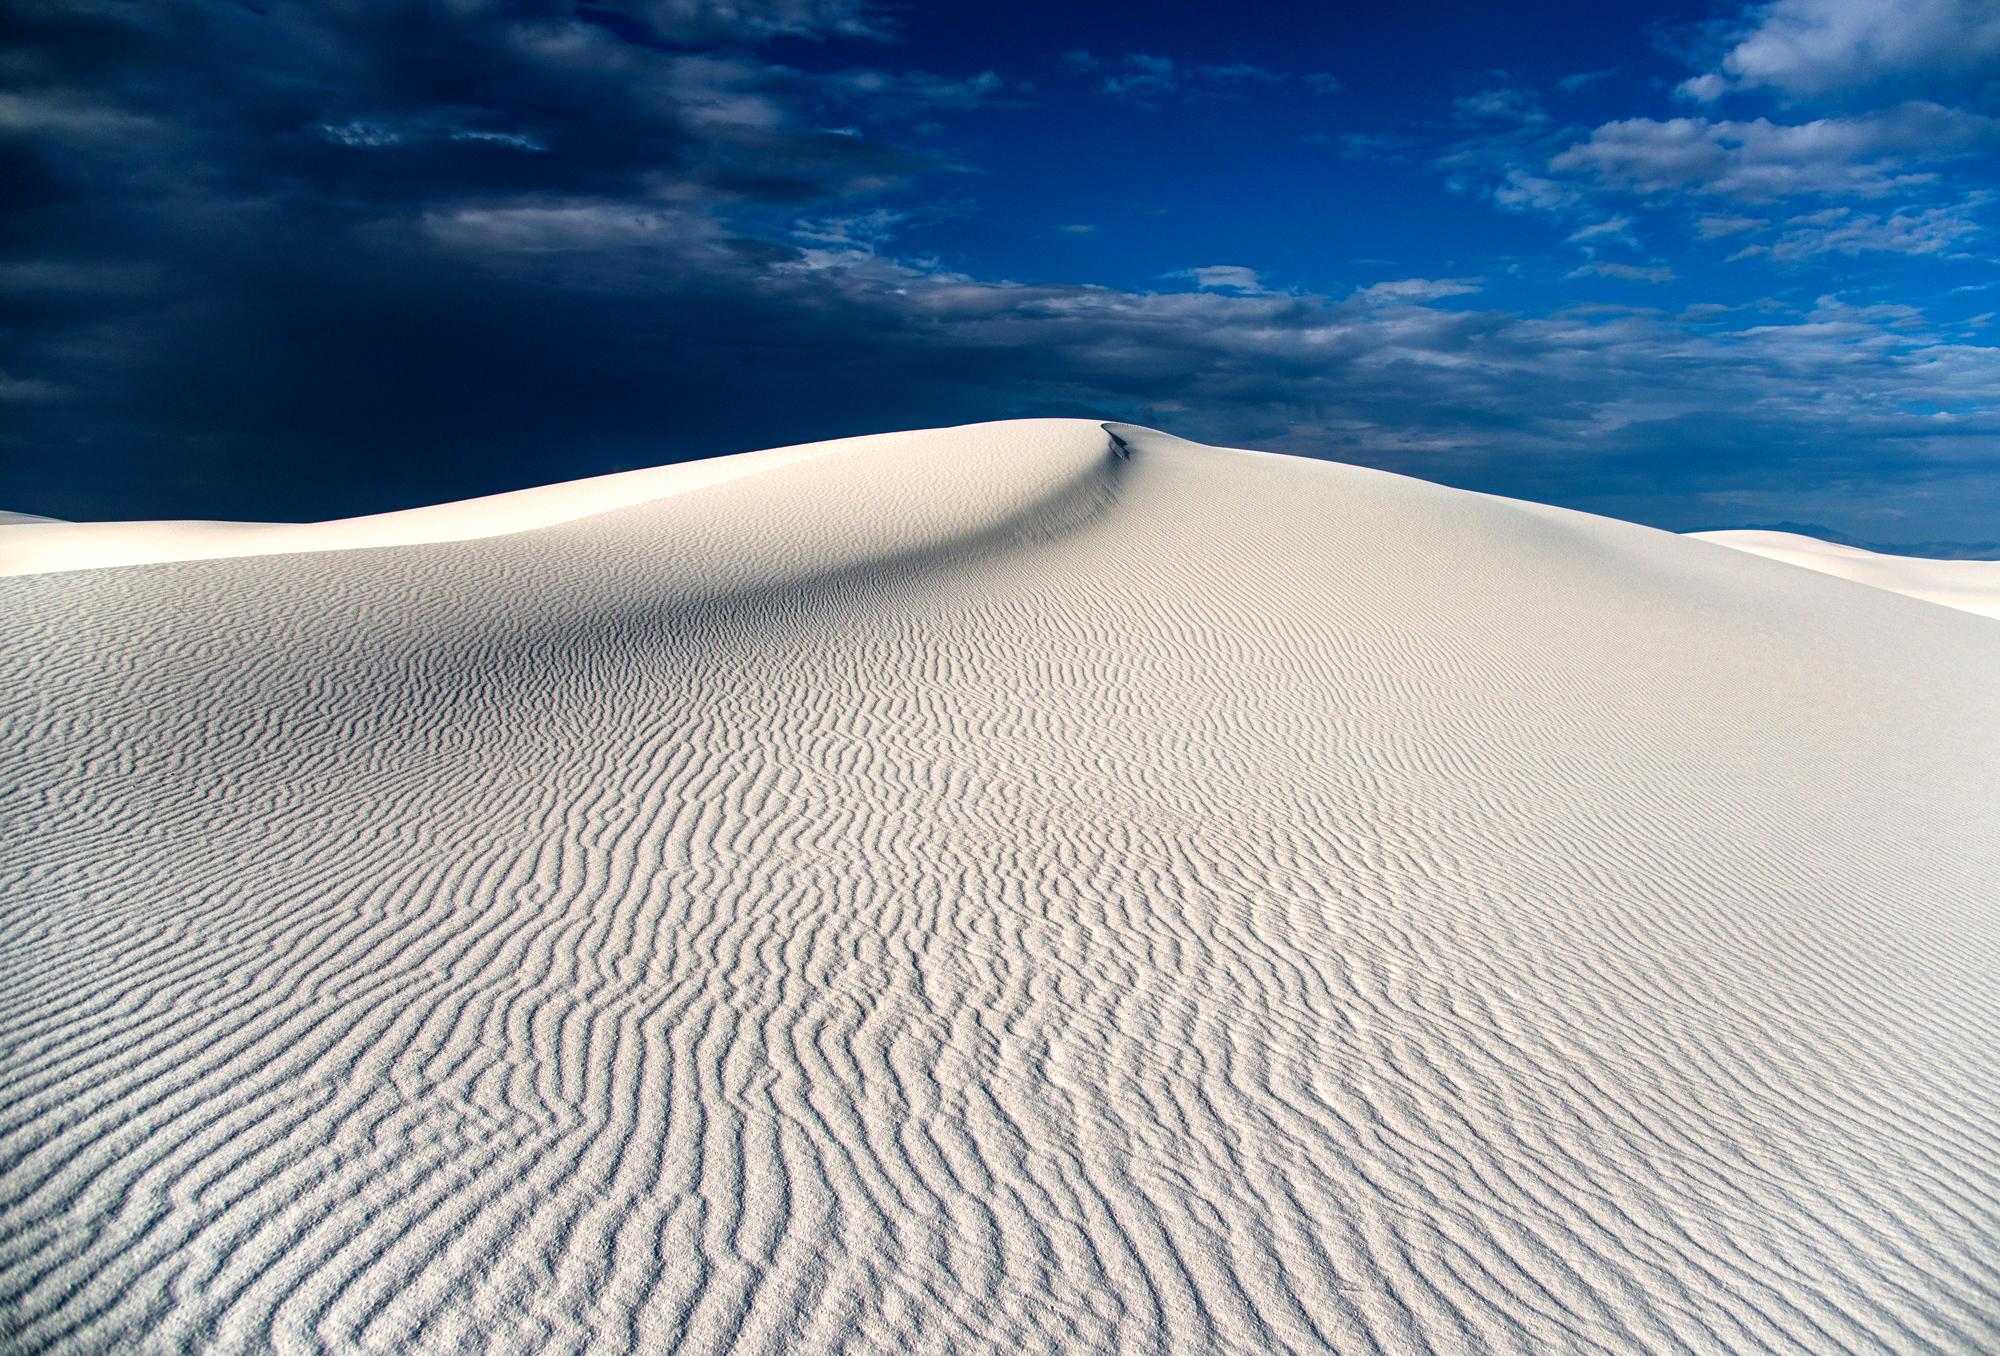 Hiking on the otherworldly dunes of White Sands, New Mexico